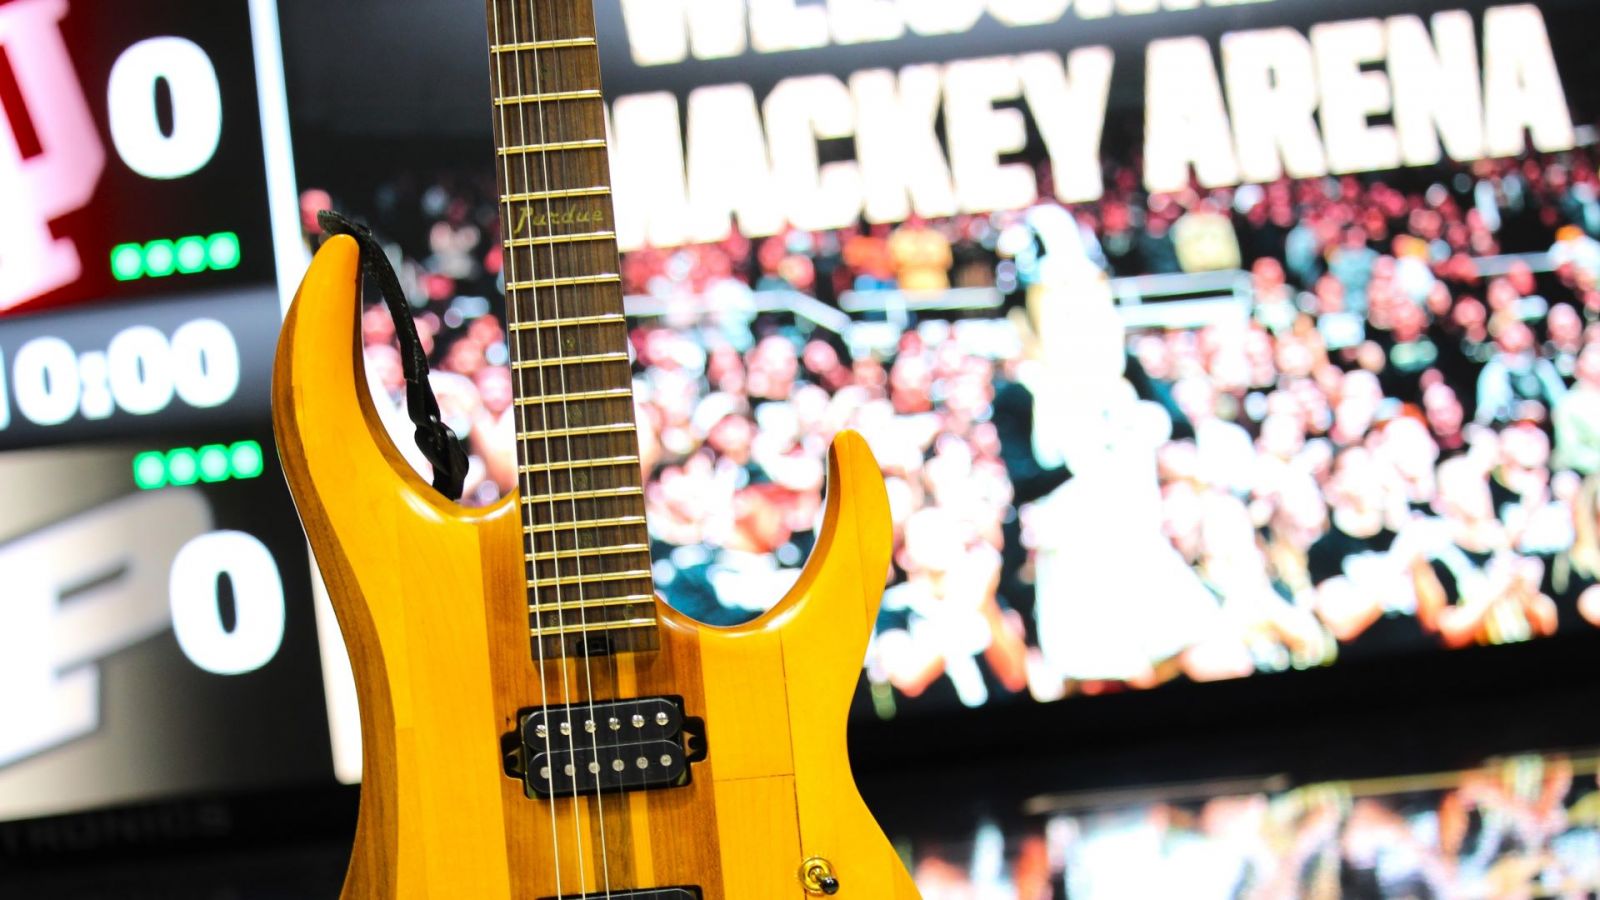 Gryphon Mawhorter's guitar, made from the wood of a prior era of Mackey court floor. (Purdue University photo/Nick Pompella)